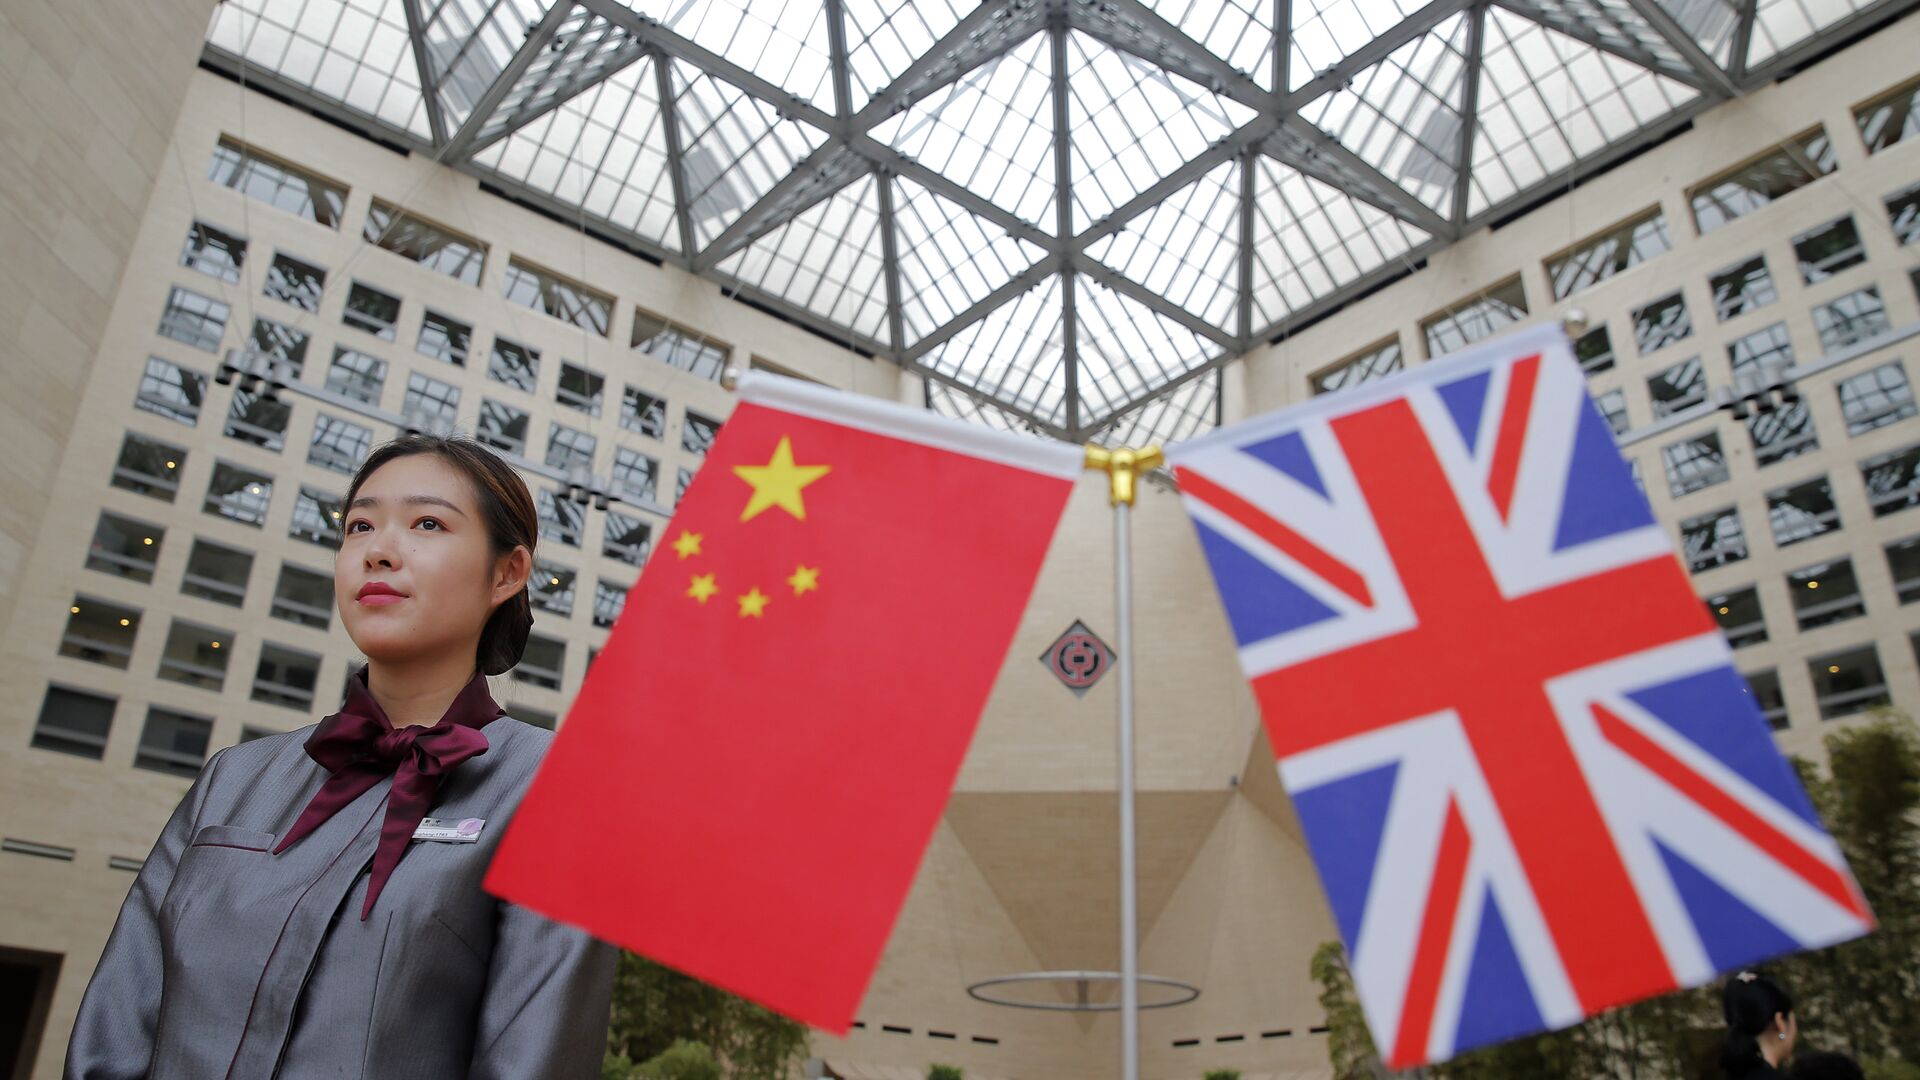 A member of staff stands behind flags as officials arrive for the UK-China High Level Financial Services Roundtable at the Bank of China head office building in Beijing on July 22, 2016 - Sputnik International, 1920, 03.02.2021